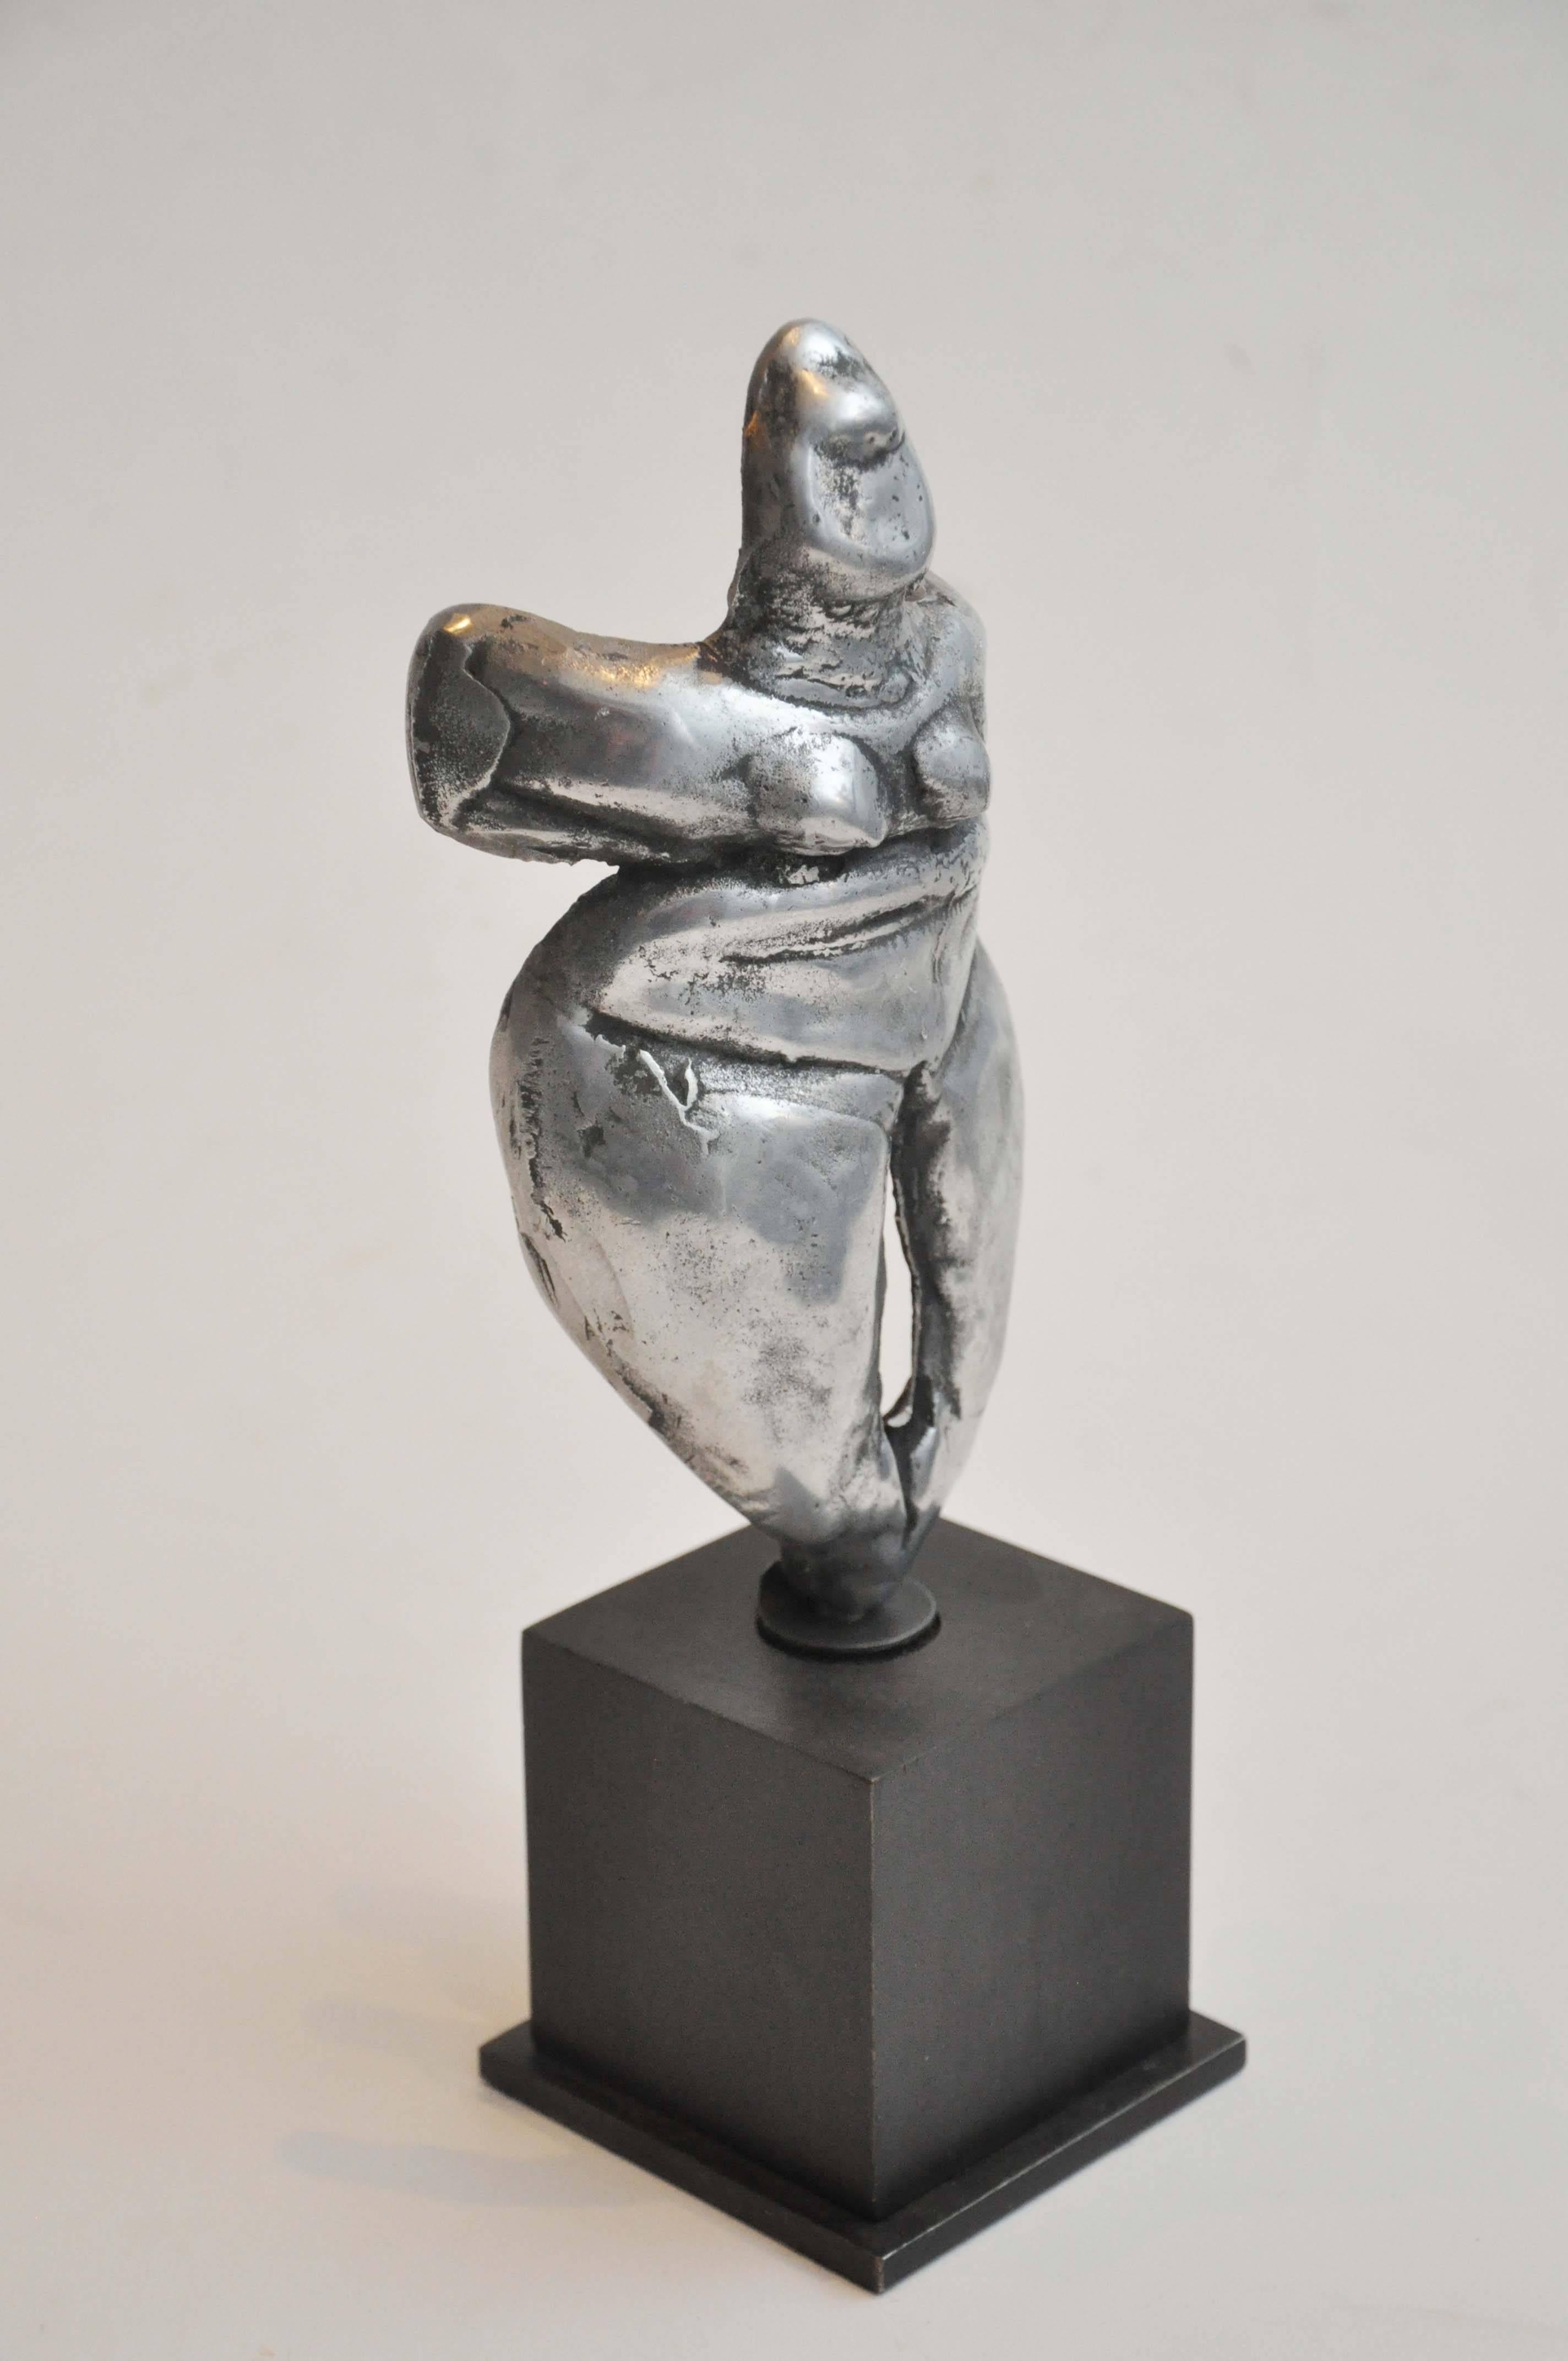 Early 20th Century Small Figural Studio Sculpture in Silver Metal from Uruguay Mounted on black wood stand. This piece is hand made, fun and funky!

Dimensions: 11.5